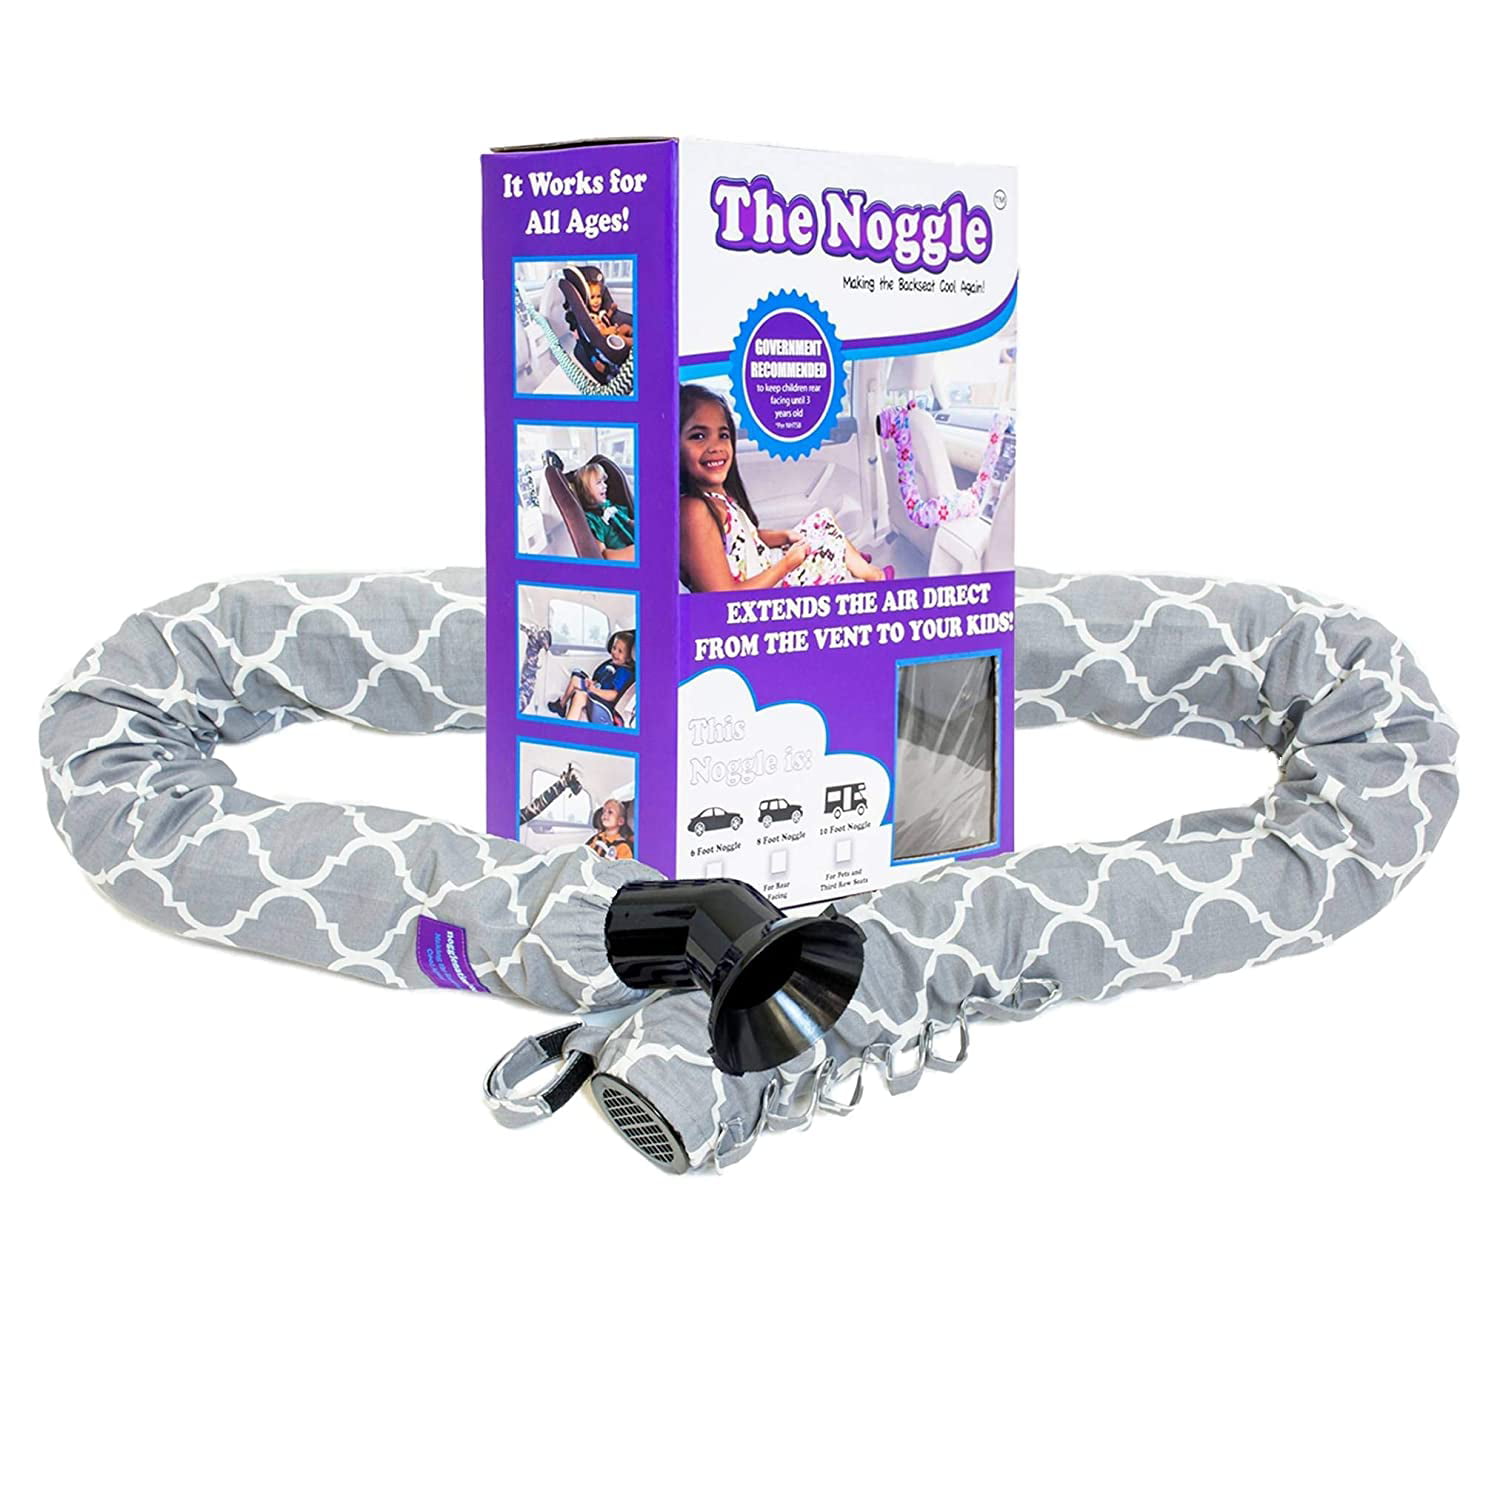 Making The Backseat Cool Again Storm Grey Quick & Easy to Use Car Travel Accessories for a Comfy Ride Summer or Winter-Air Vent Extender Hose Directs Cool or Warm Air to Your Kids- 6ft The Noggle 